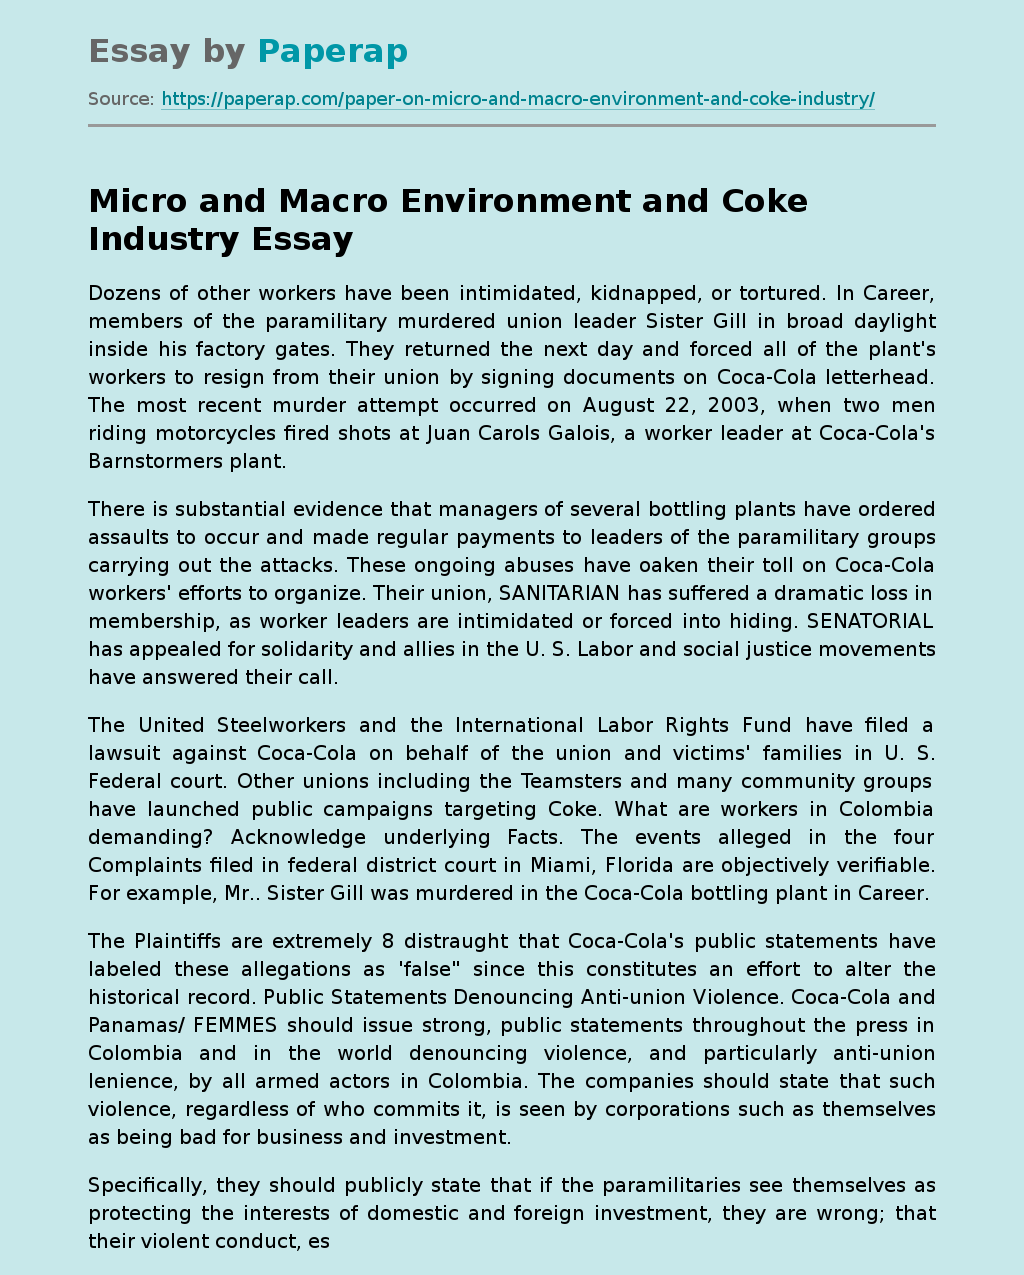 Micro and Macro Environment and Coke Industry